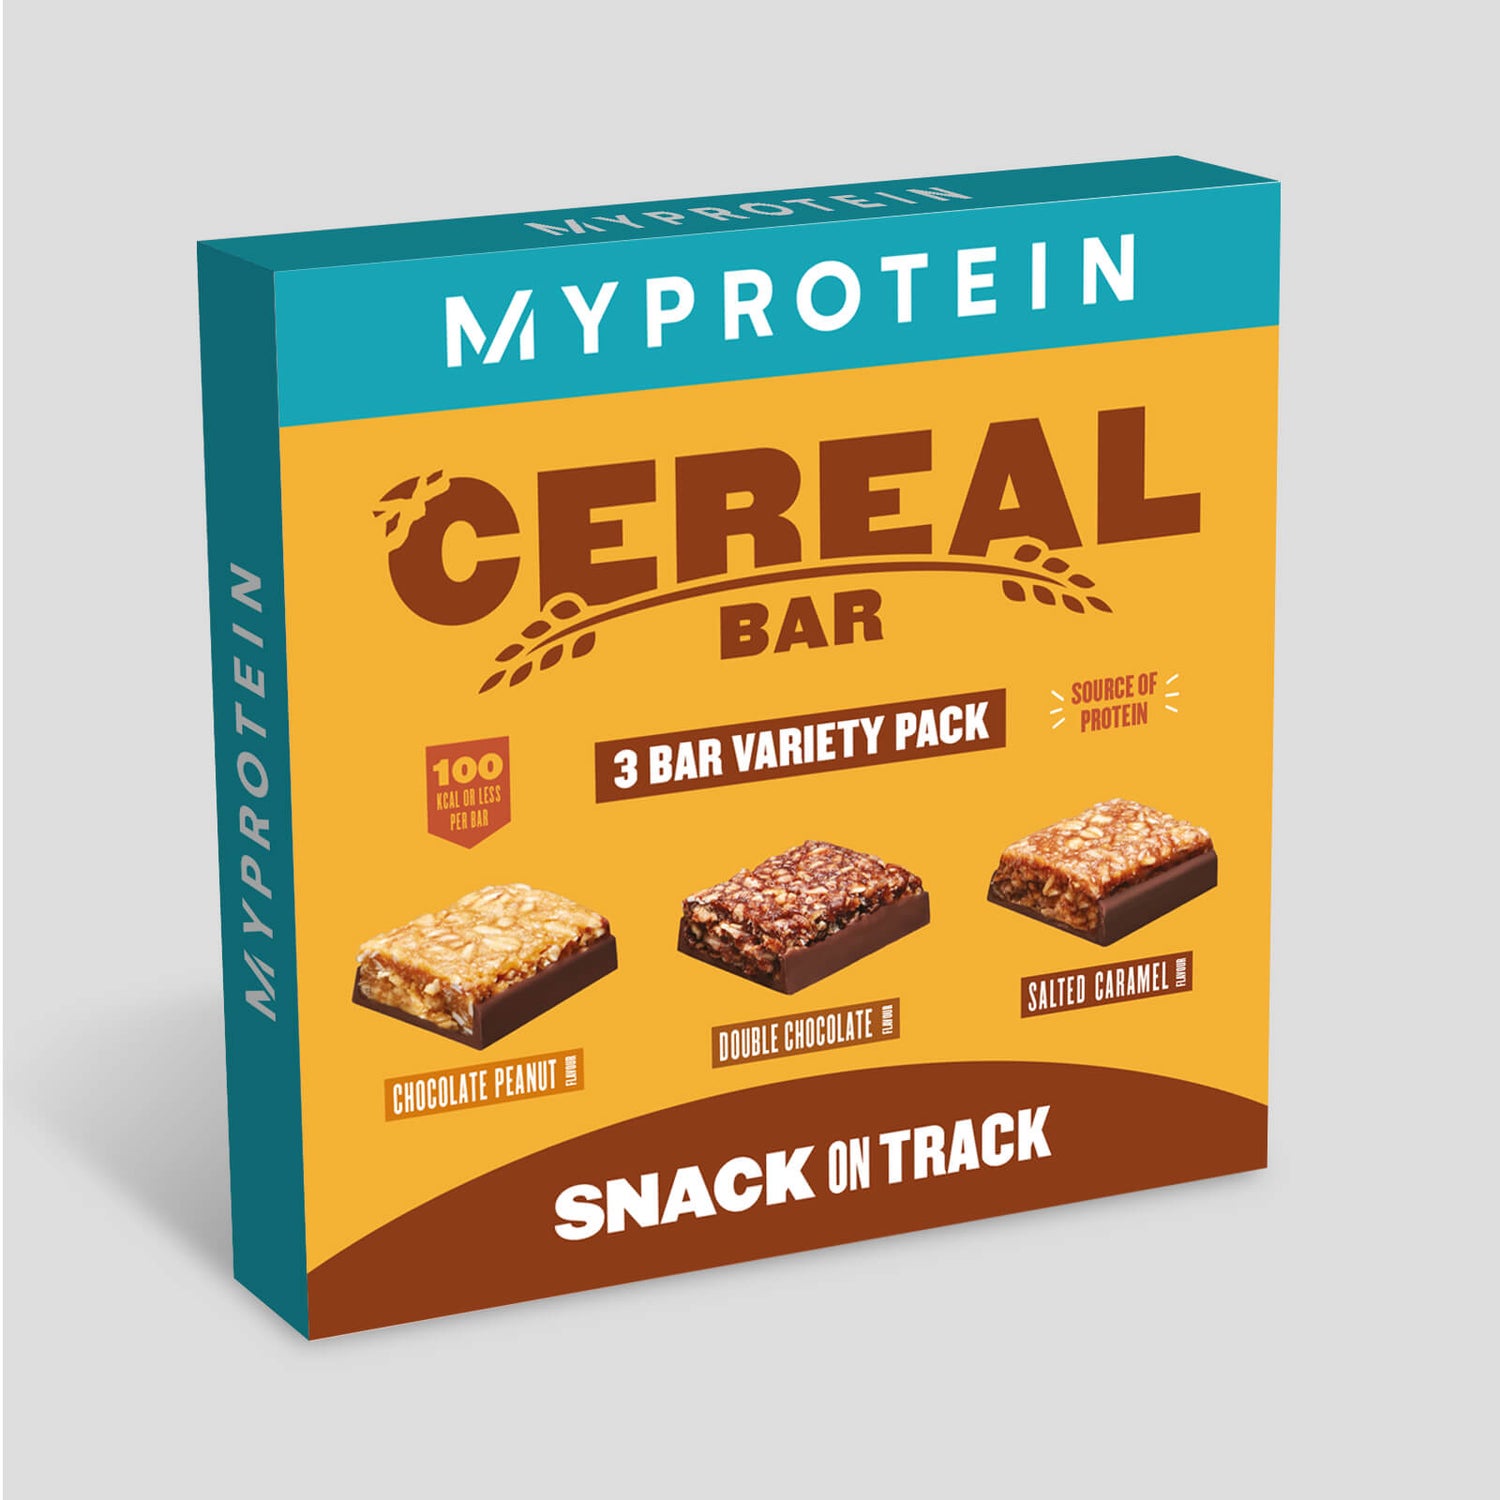 Myprotein Cereal Bar Selection Box - 100g